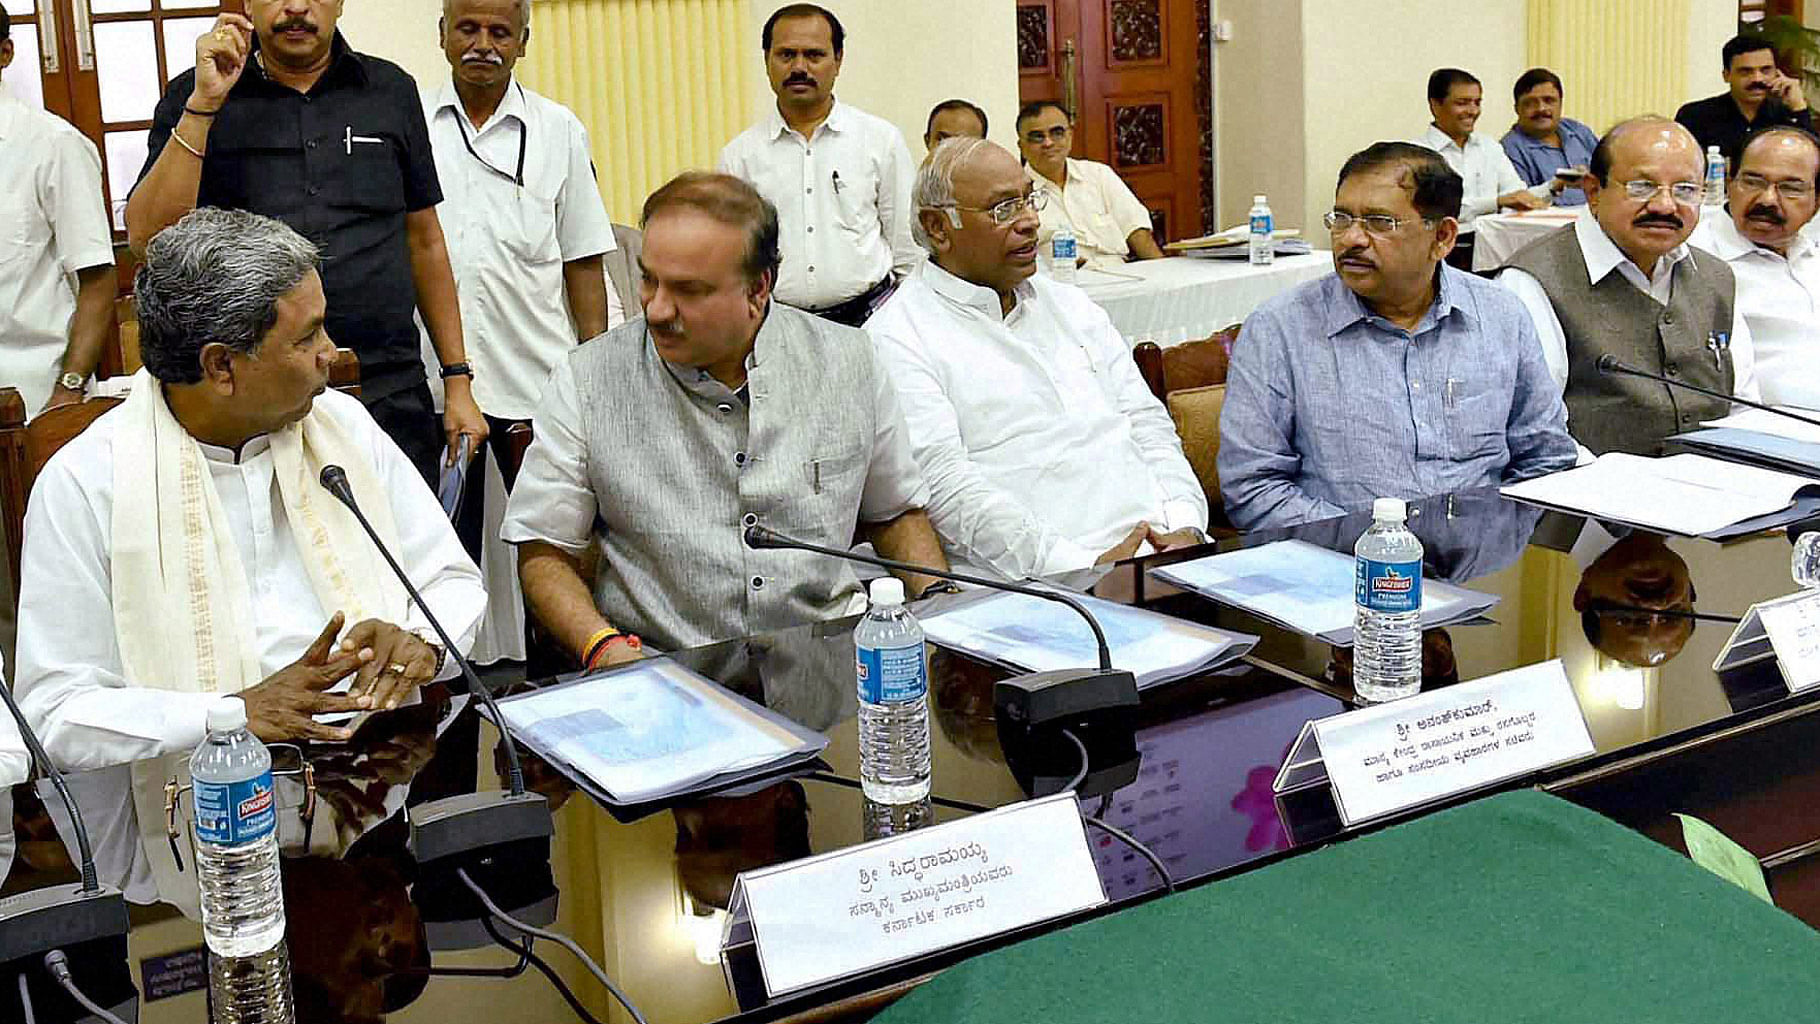 Karnataka CM  S Siddaramaiah (extreme left)  and Union Minister Anantha Kumar (second from right)  during an all-party meeting on Cauvery water dispute in Bangalore. (Photo: PTI)